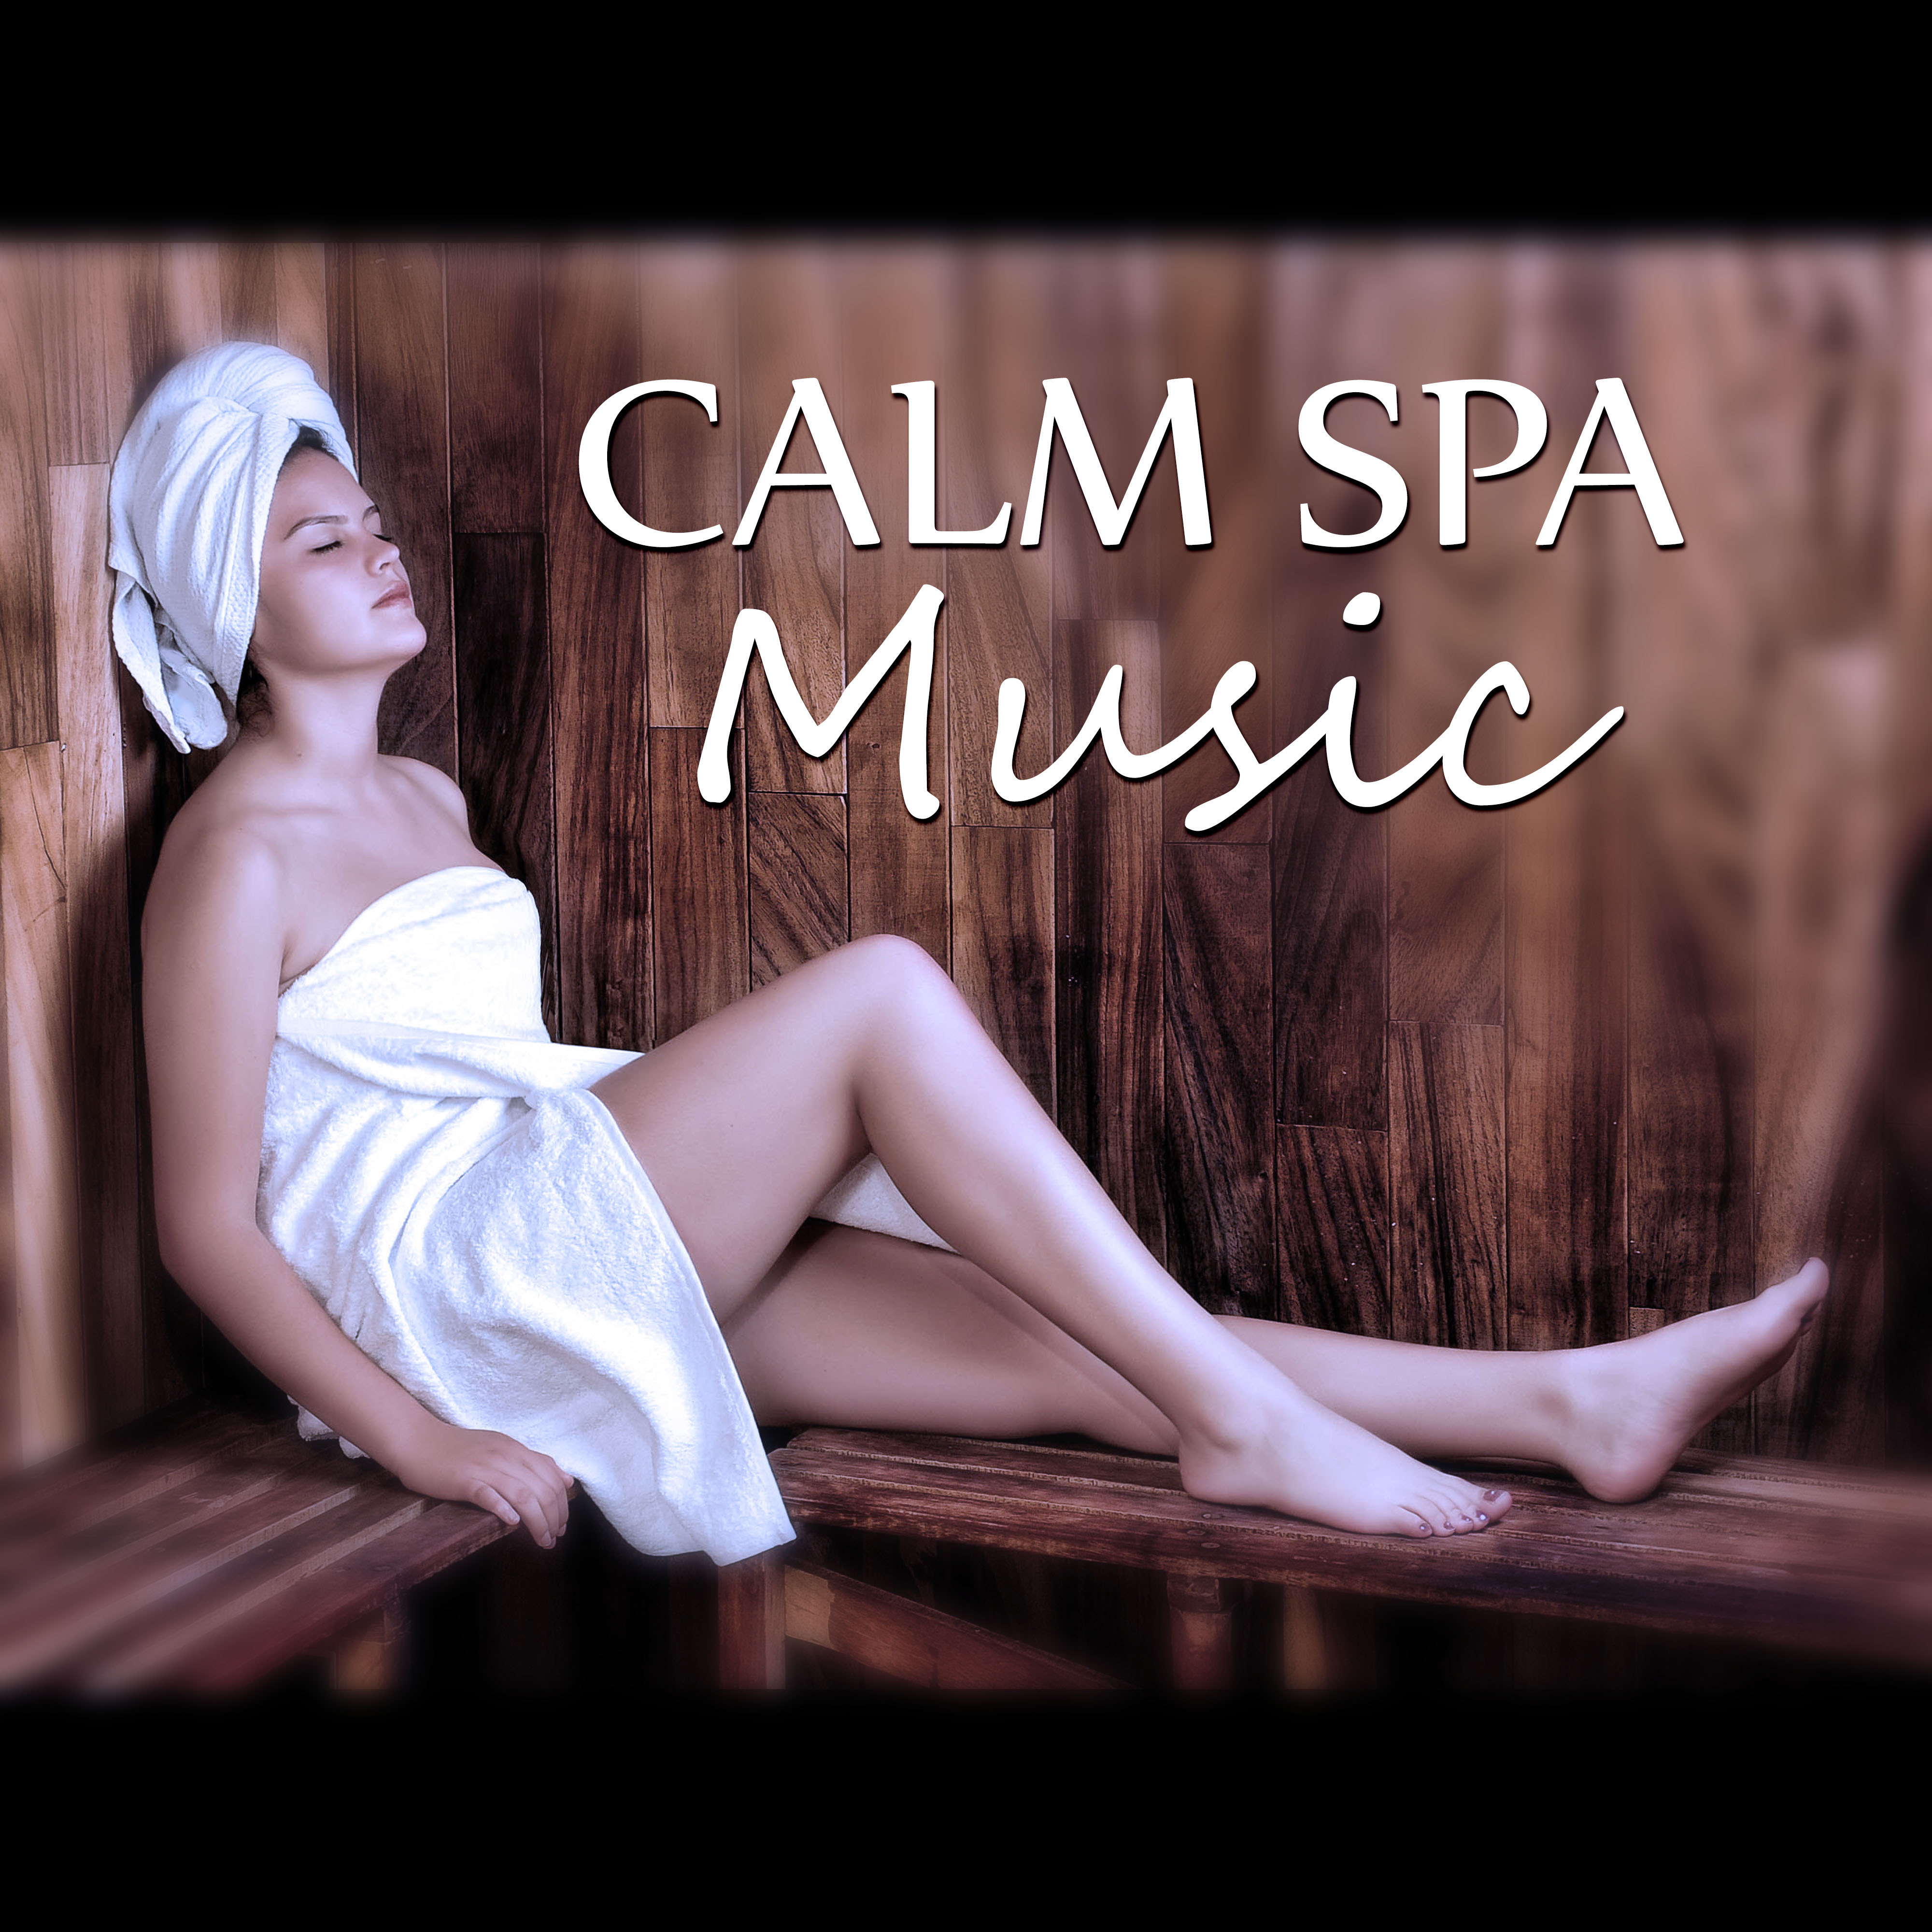 Calm Spa Music – Inner Silence, New Age, Calmness, Massage Music for Aromatherapy, Ocean Waves, Soothing Music, Peaceful Spa, Rain, Nature Sounds